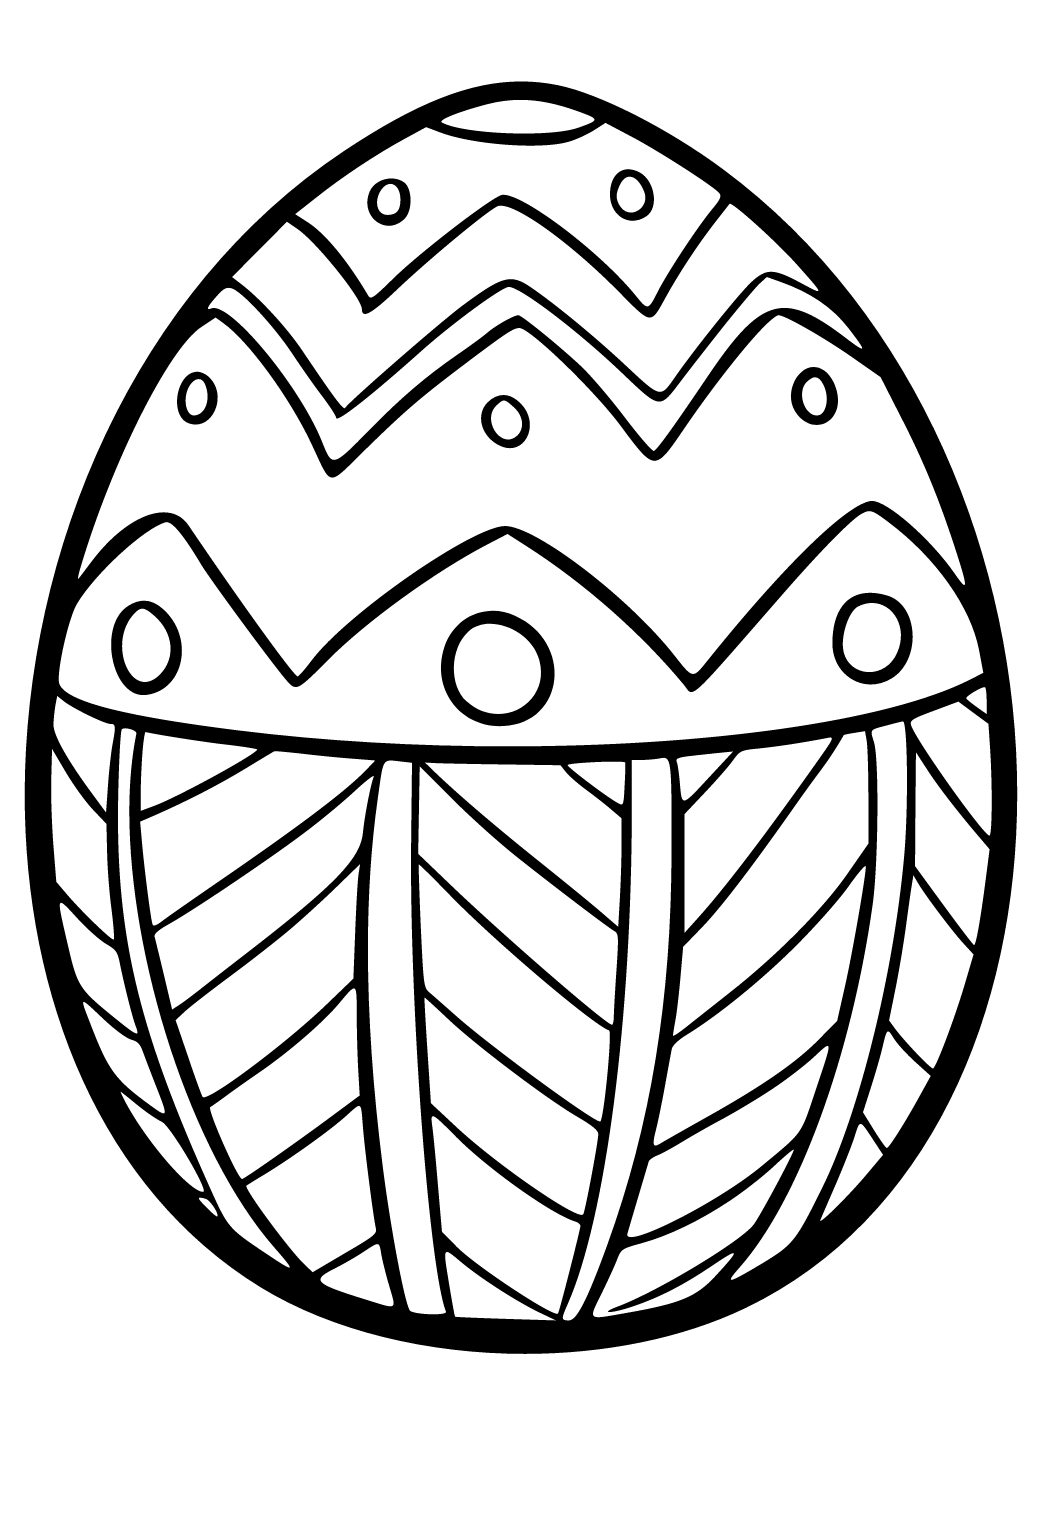 Free Printable Egg Pattern Coloring Page for Adults and Kids Lystok com